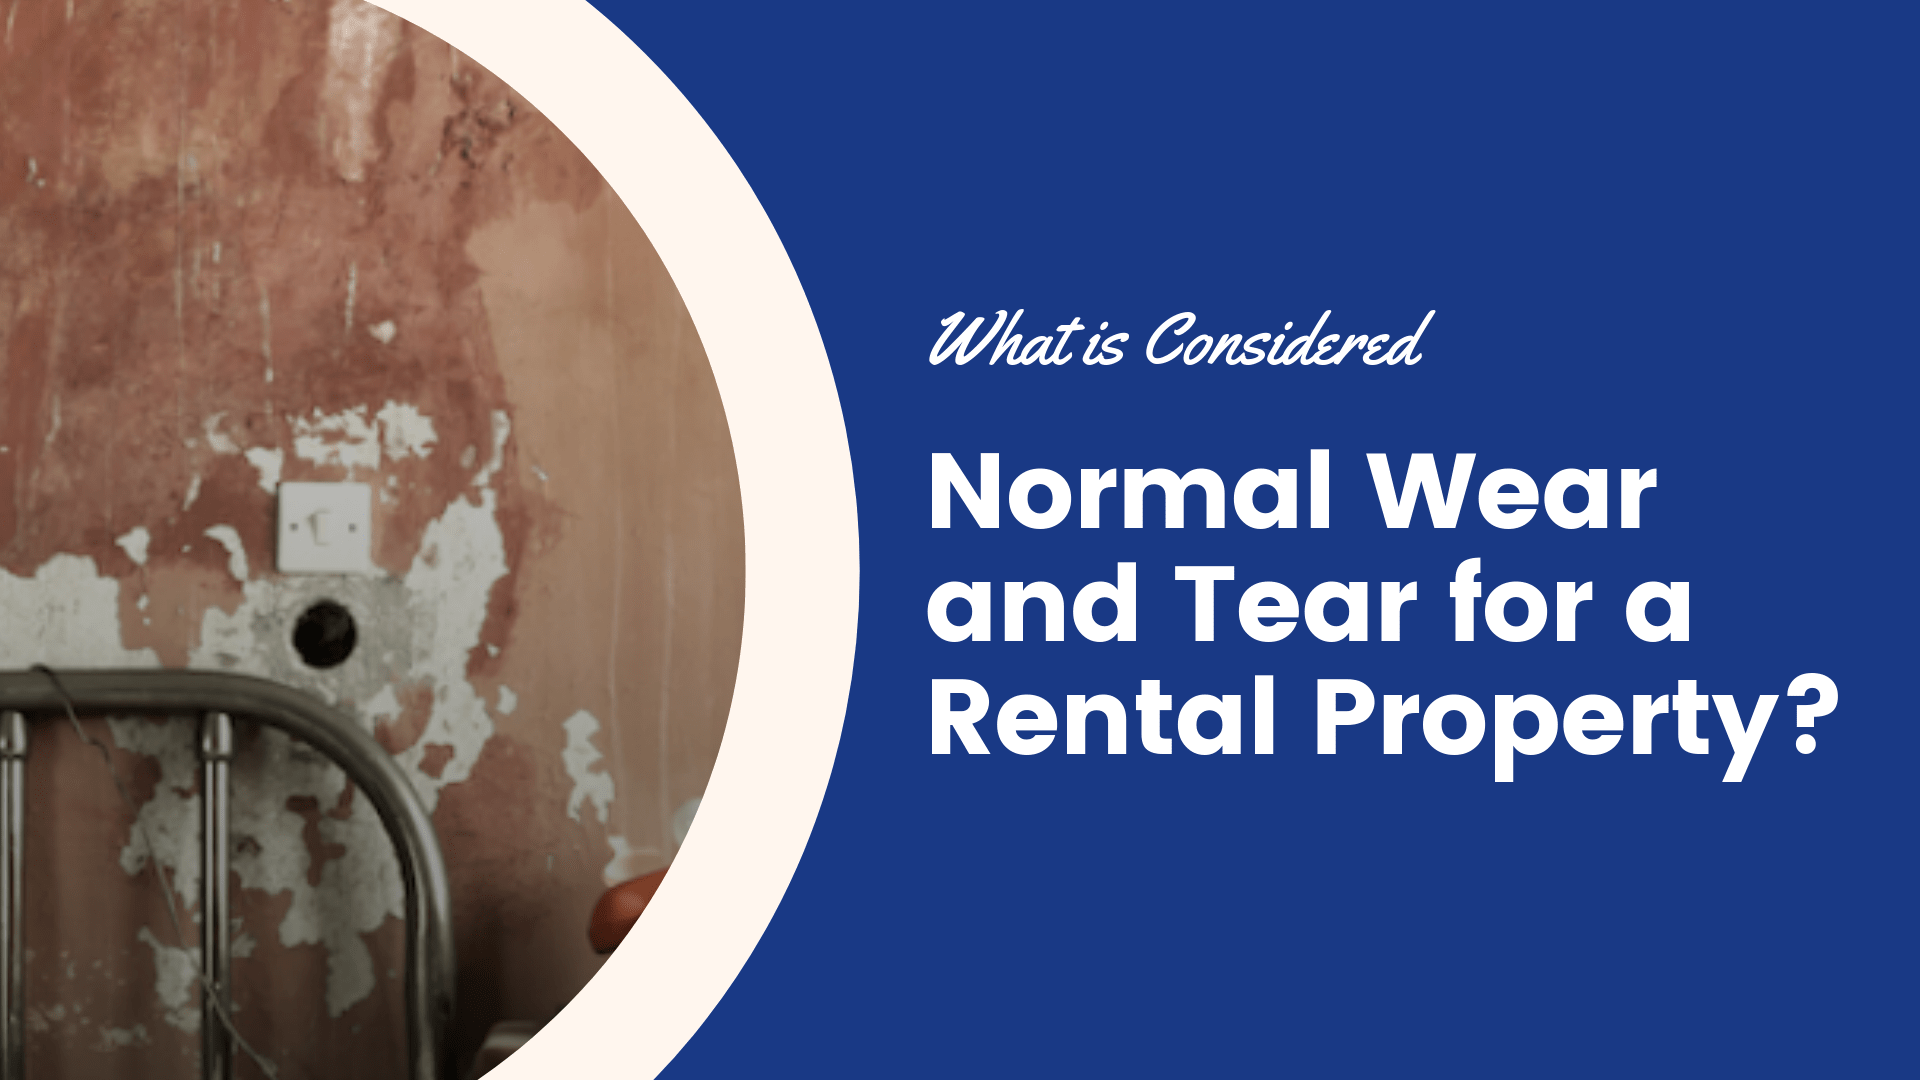 Normal Wear and Tear vs. Property Damage